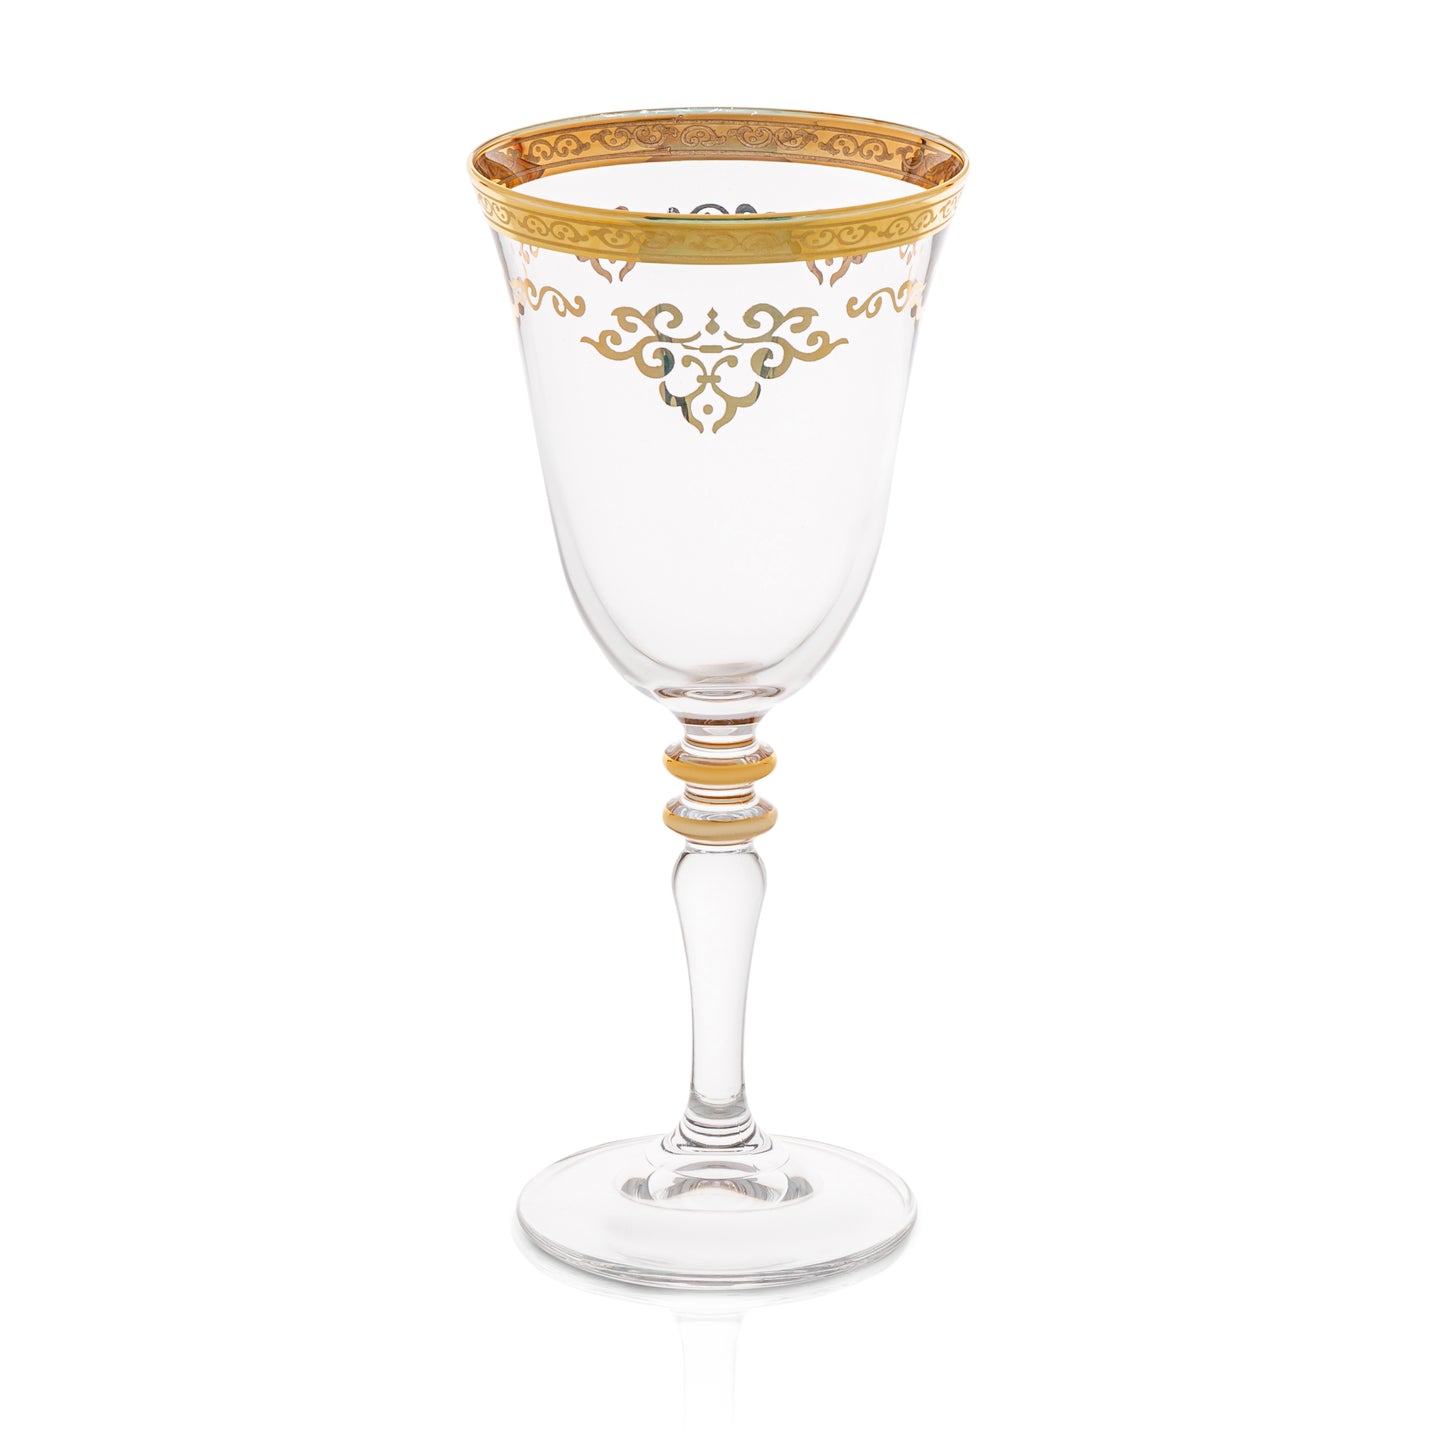 Set of 6 Glasses with Gold Design